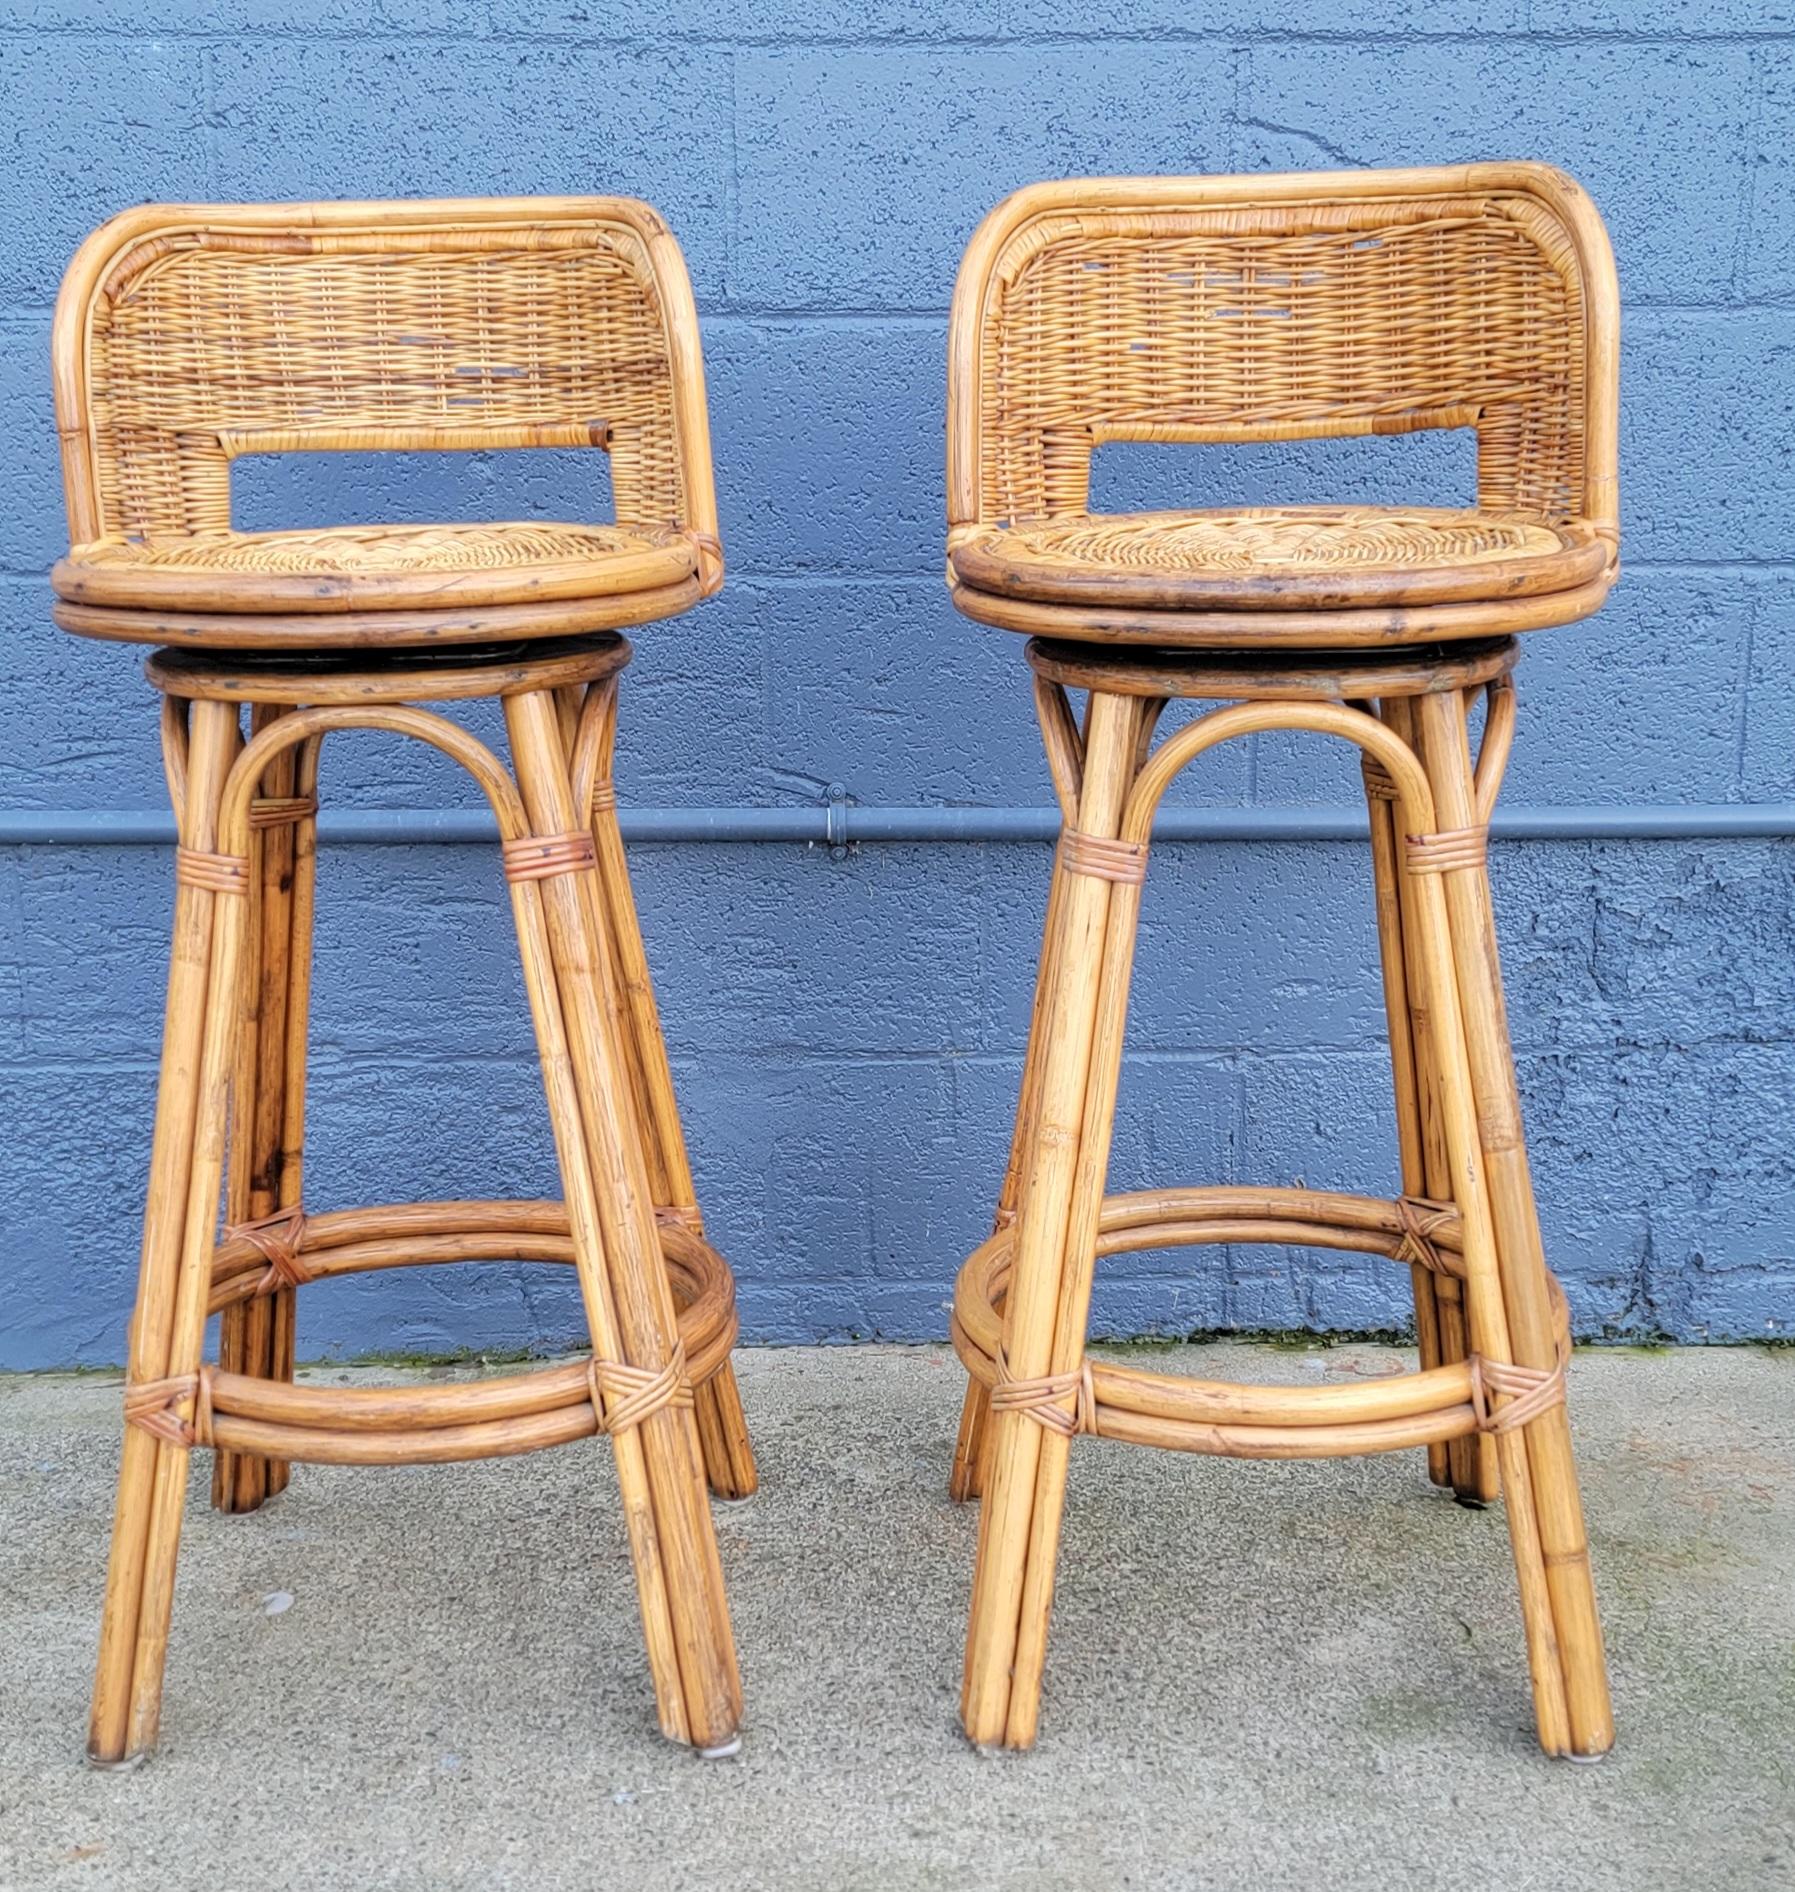 A pair of bamboo and woven wicker bar stools with swivel feature and seat backs. All bindings intact, sturdy construction. In very good to excellent original condition.